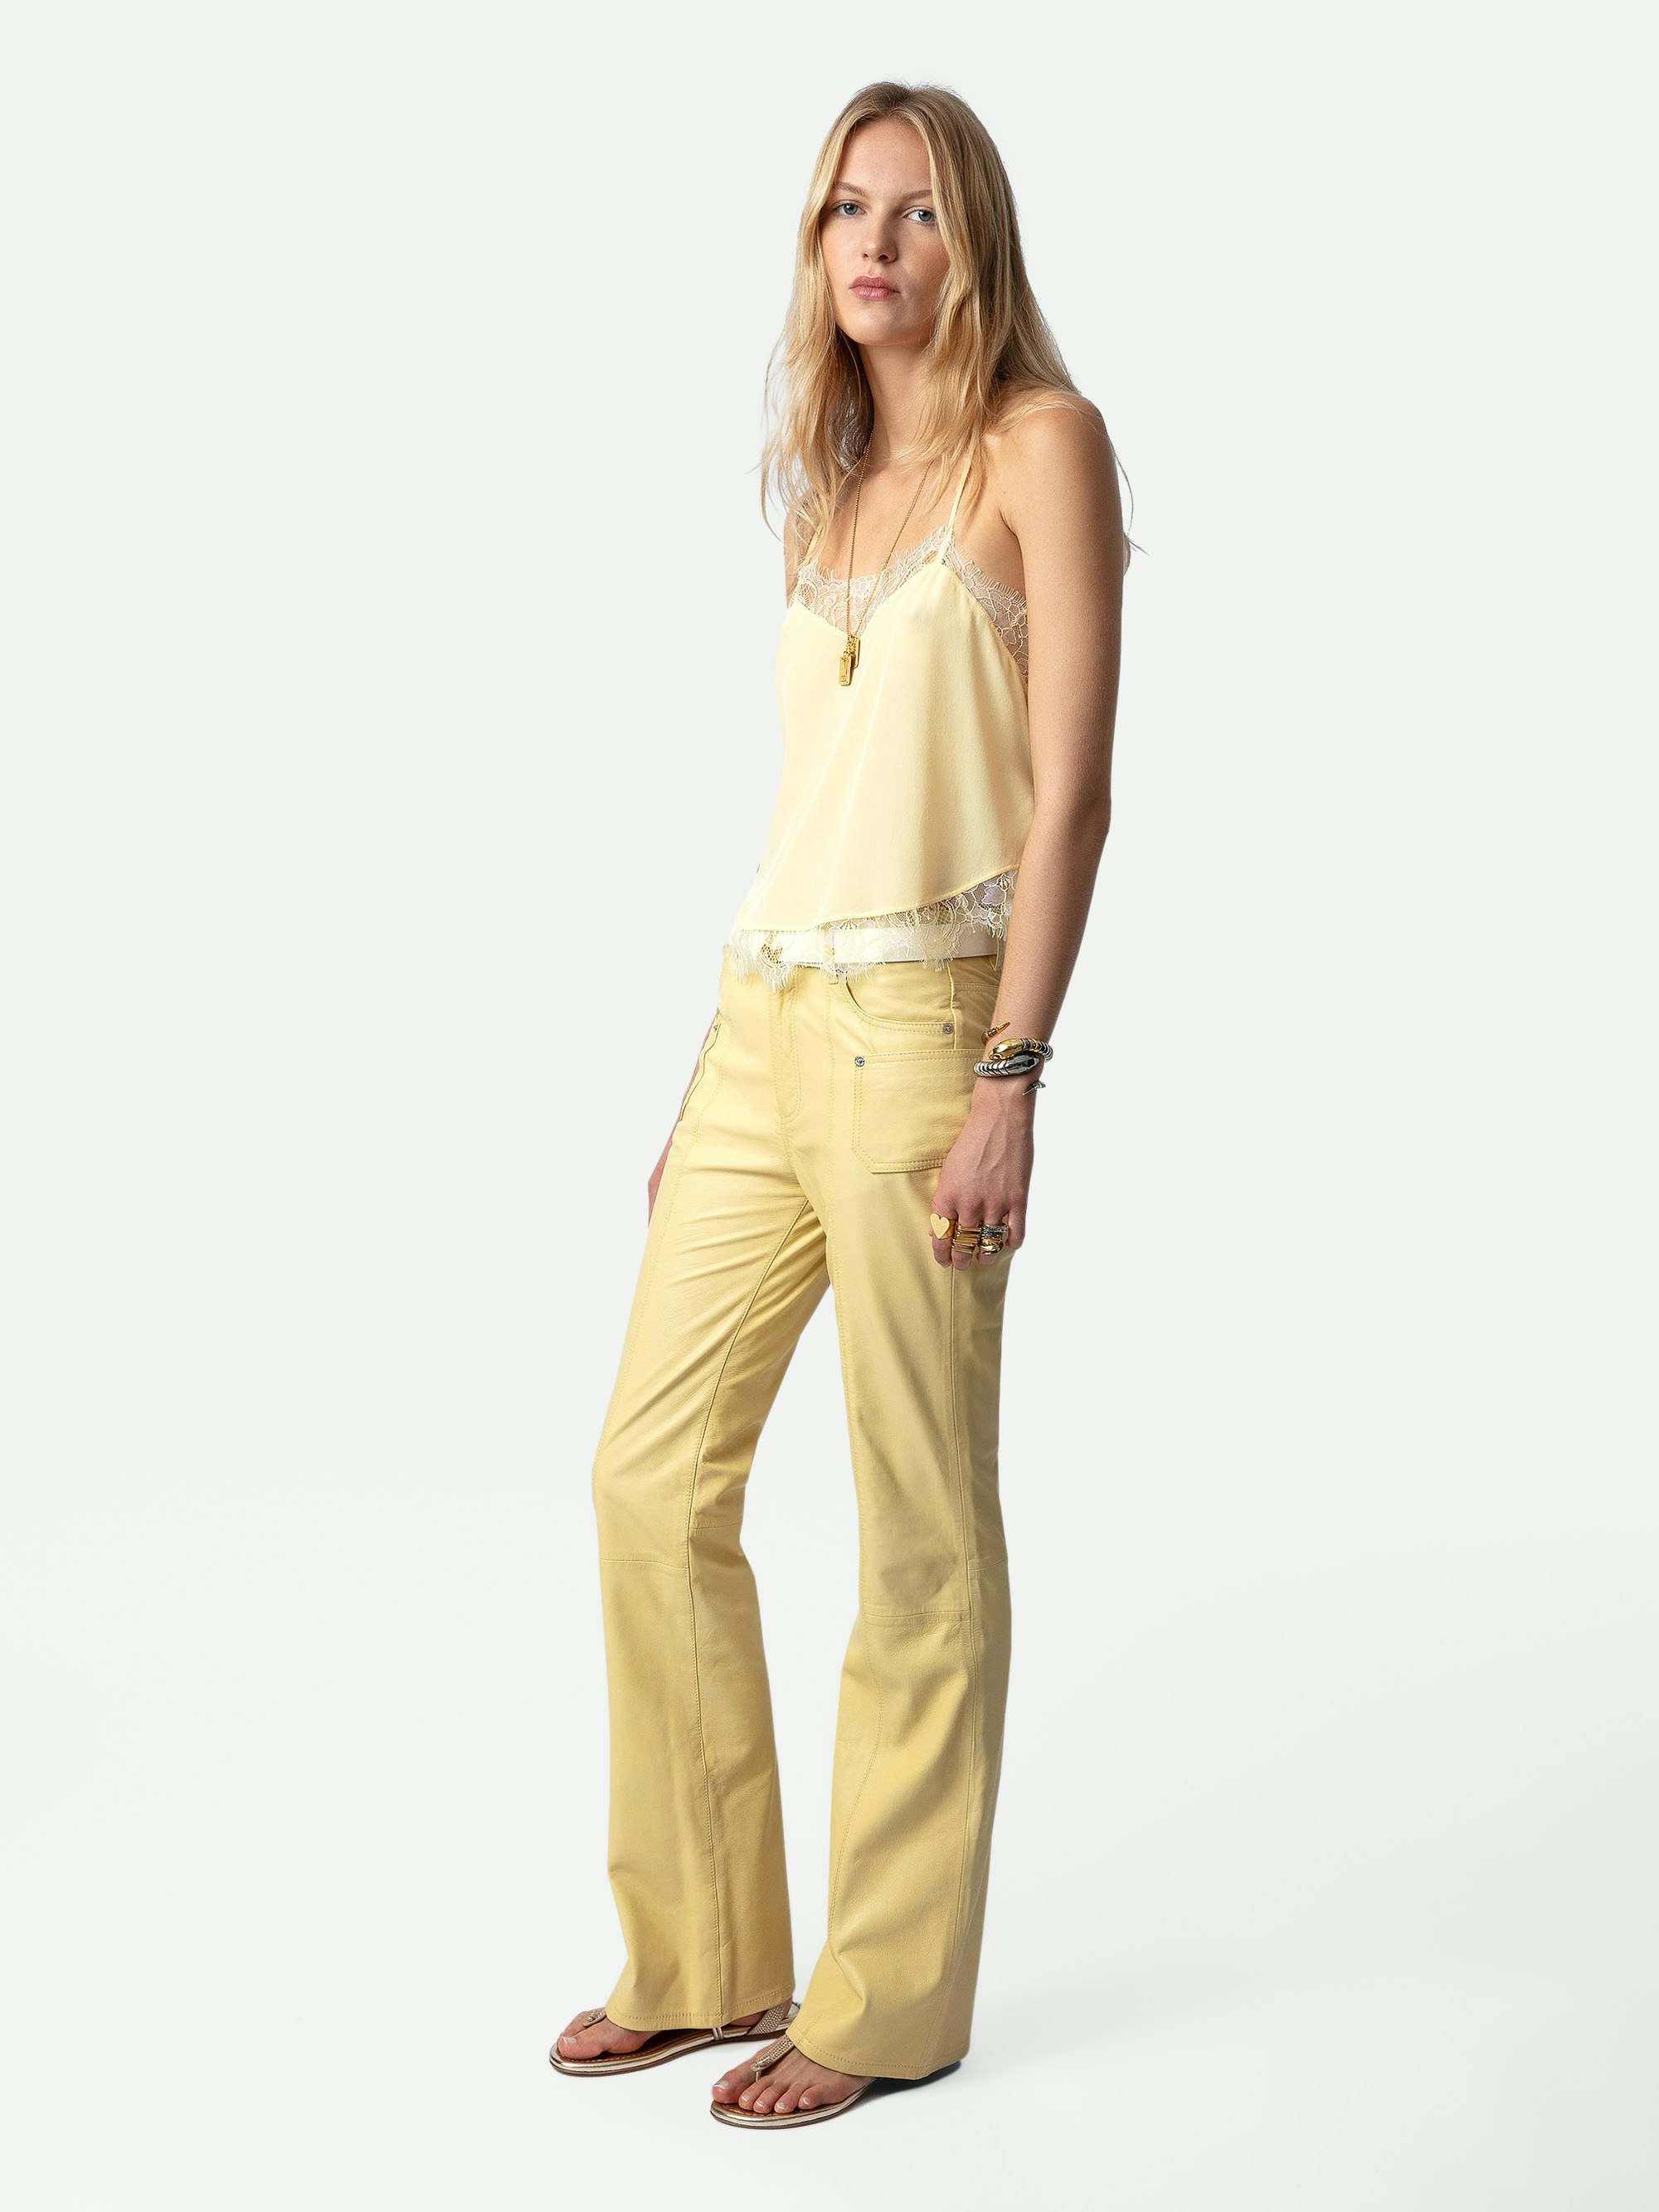 Claudy Silk Camisole - Light yellow silk camisole with thin straps and lace trim.